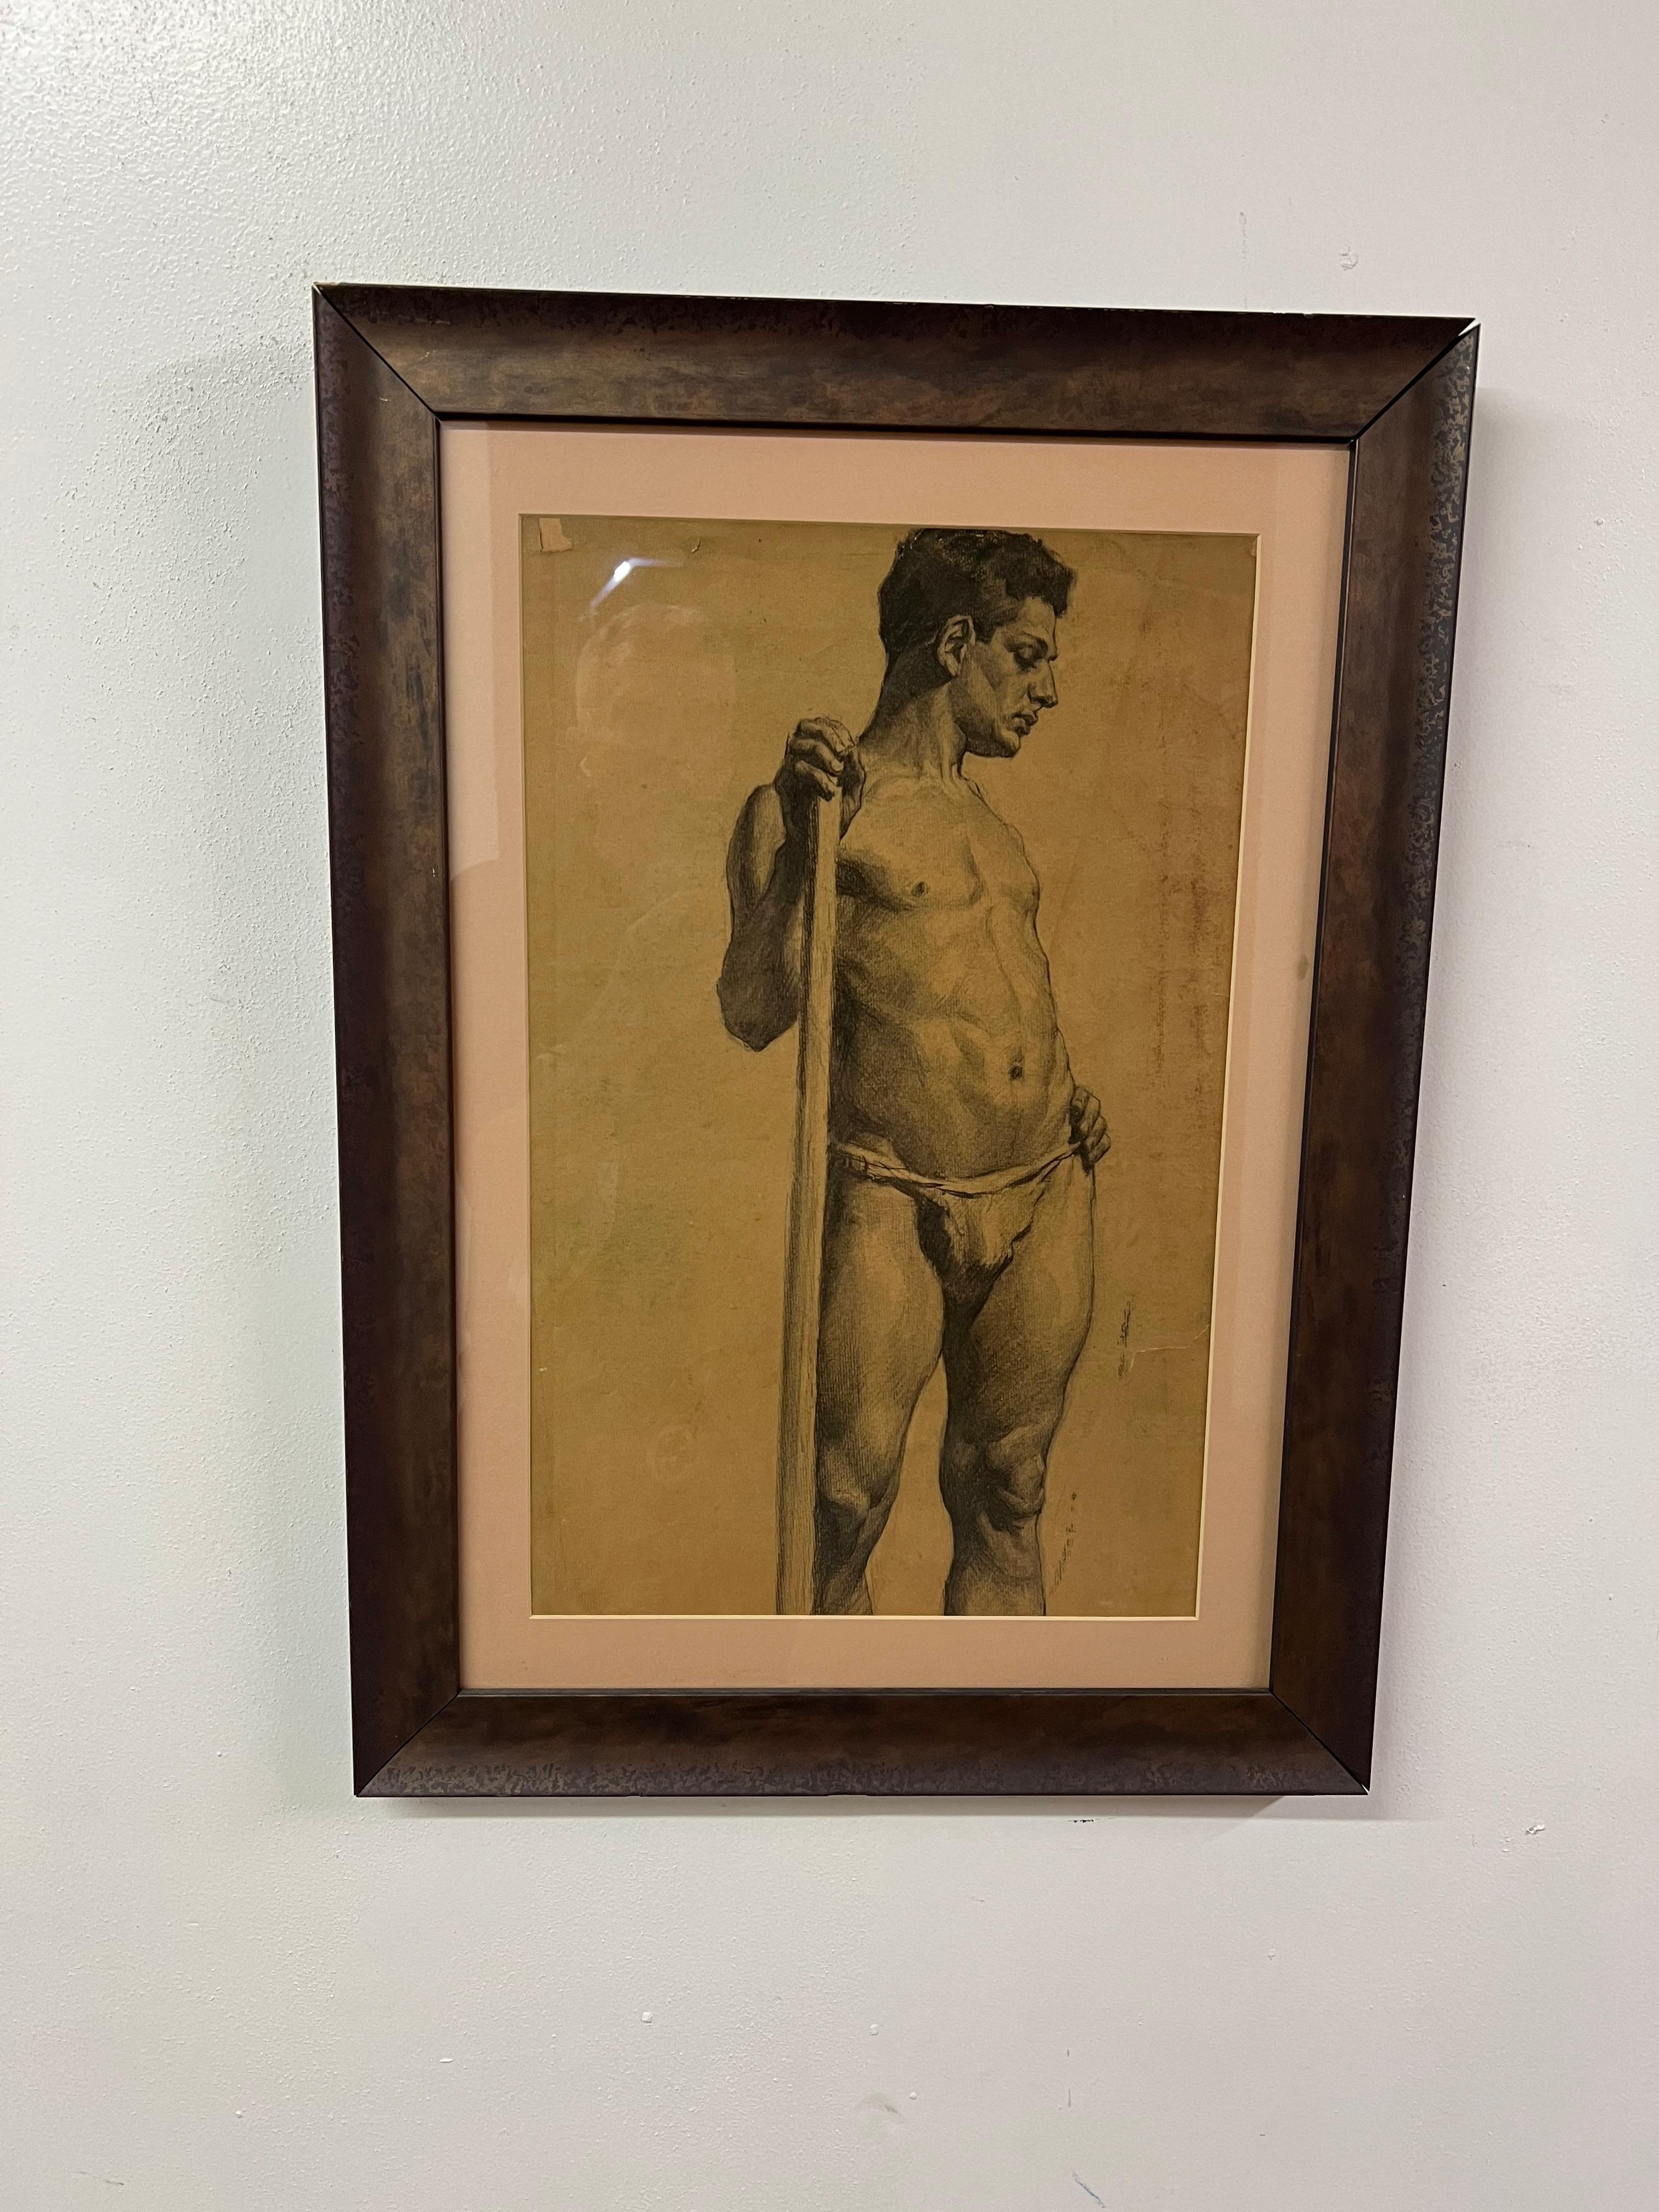 Unique drawing of a young man - done in pencil, or charcoal. the piece speaks as a nice vintage piece, with a lot of character. There is one small nick in the paper at the top left, however, the drawing and frame are of such quality we don't believe